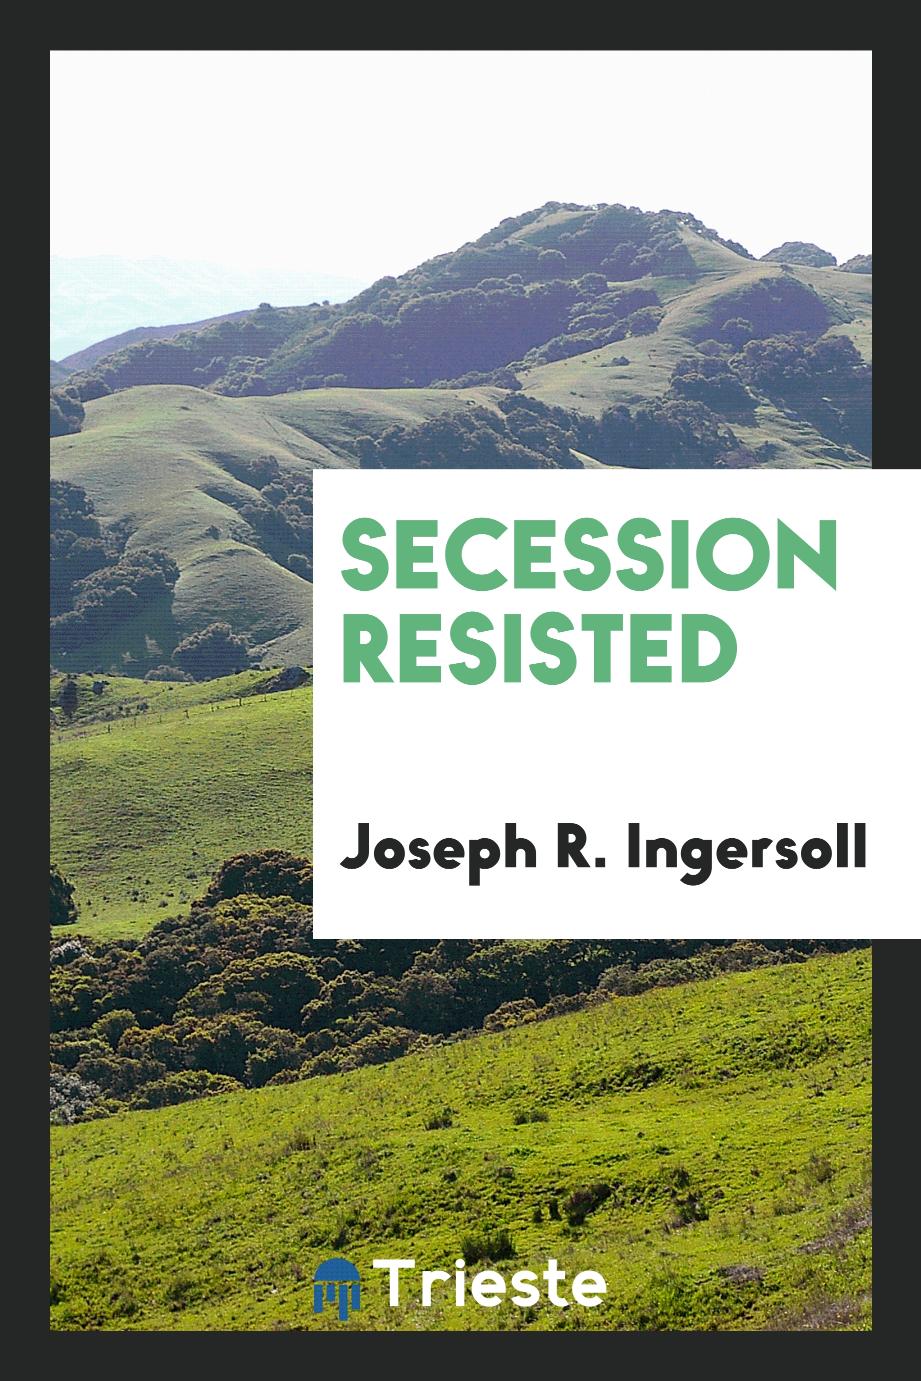 Secession resisted